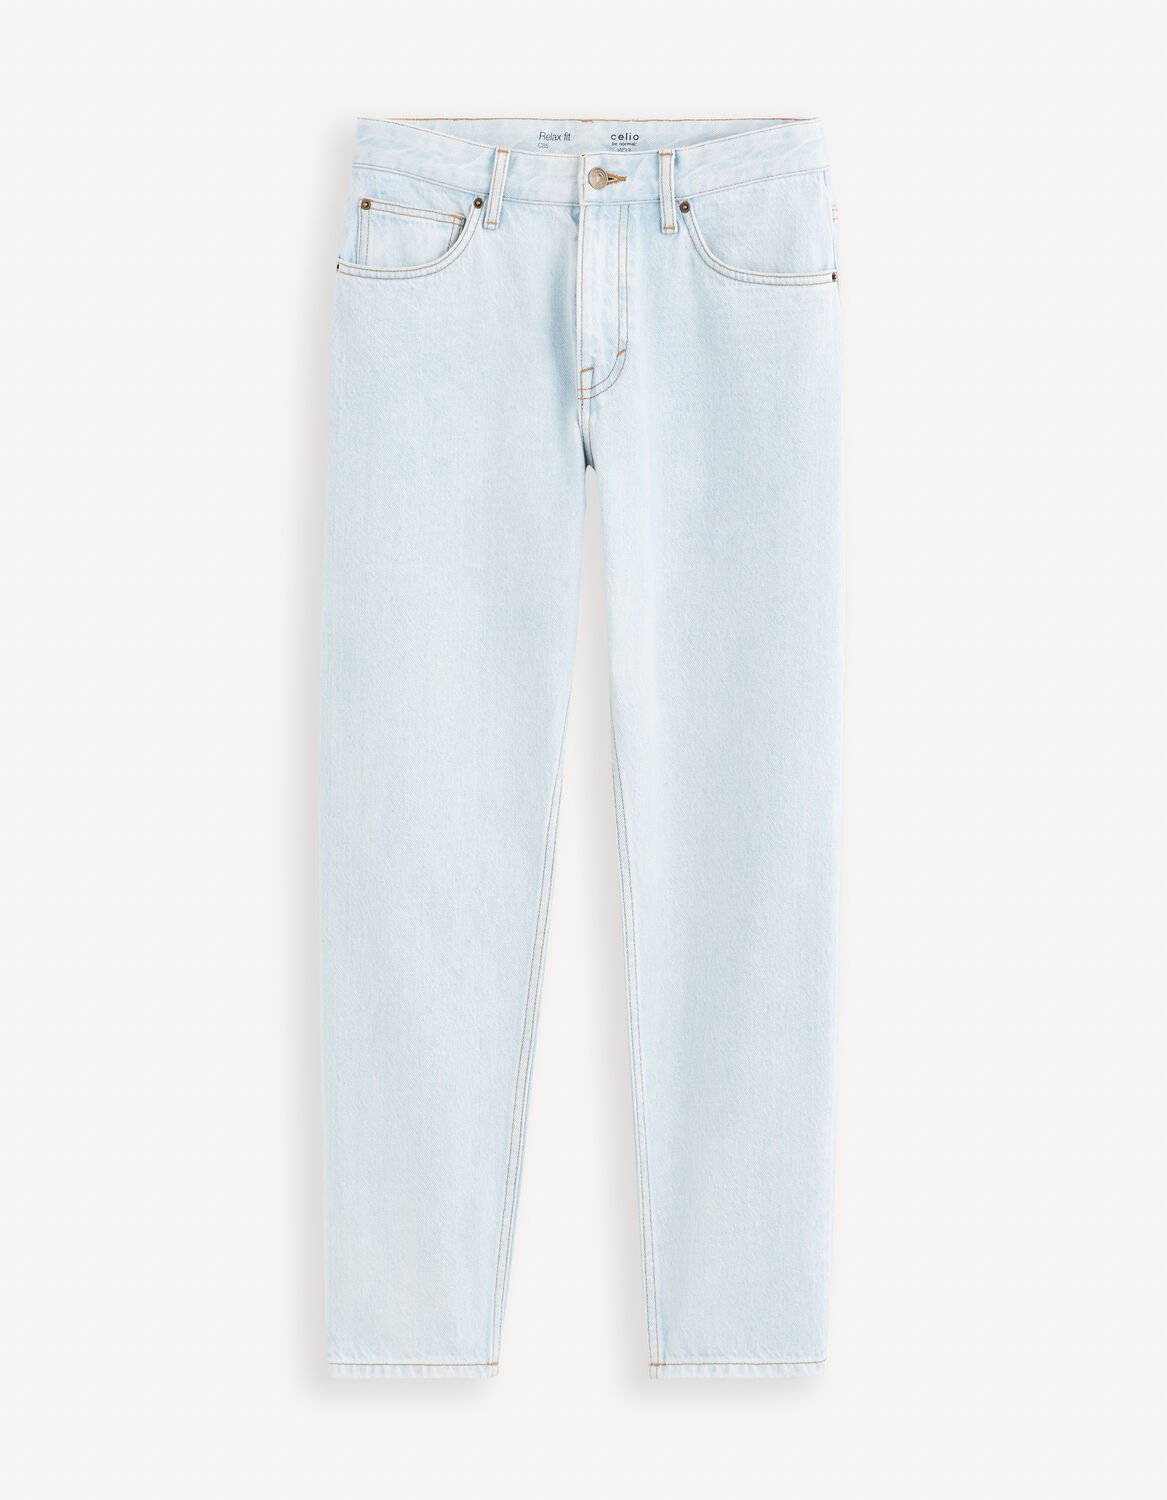 jeans relax c85 - bleached